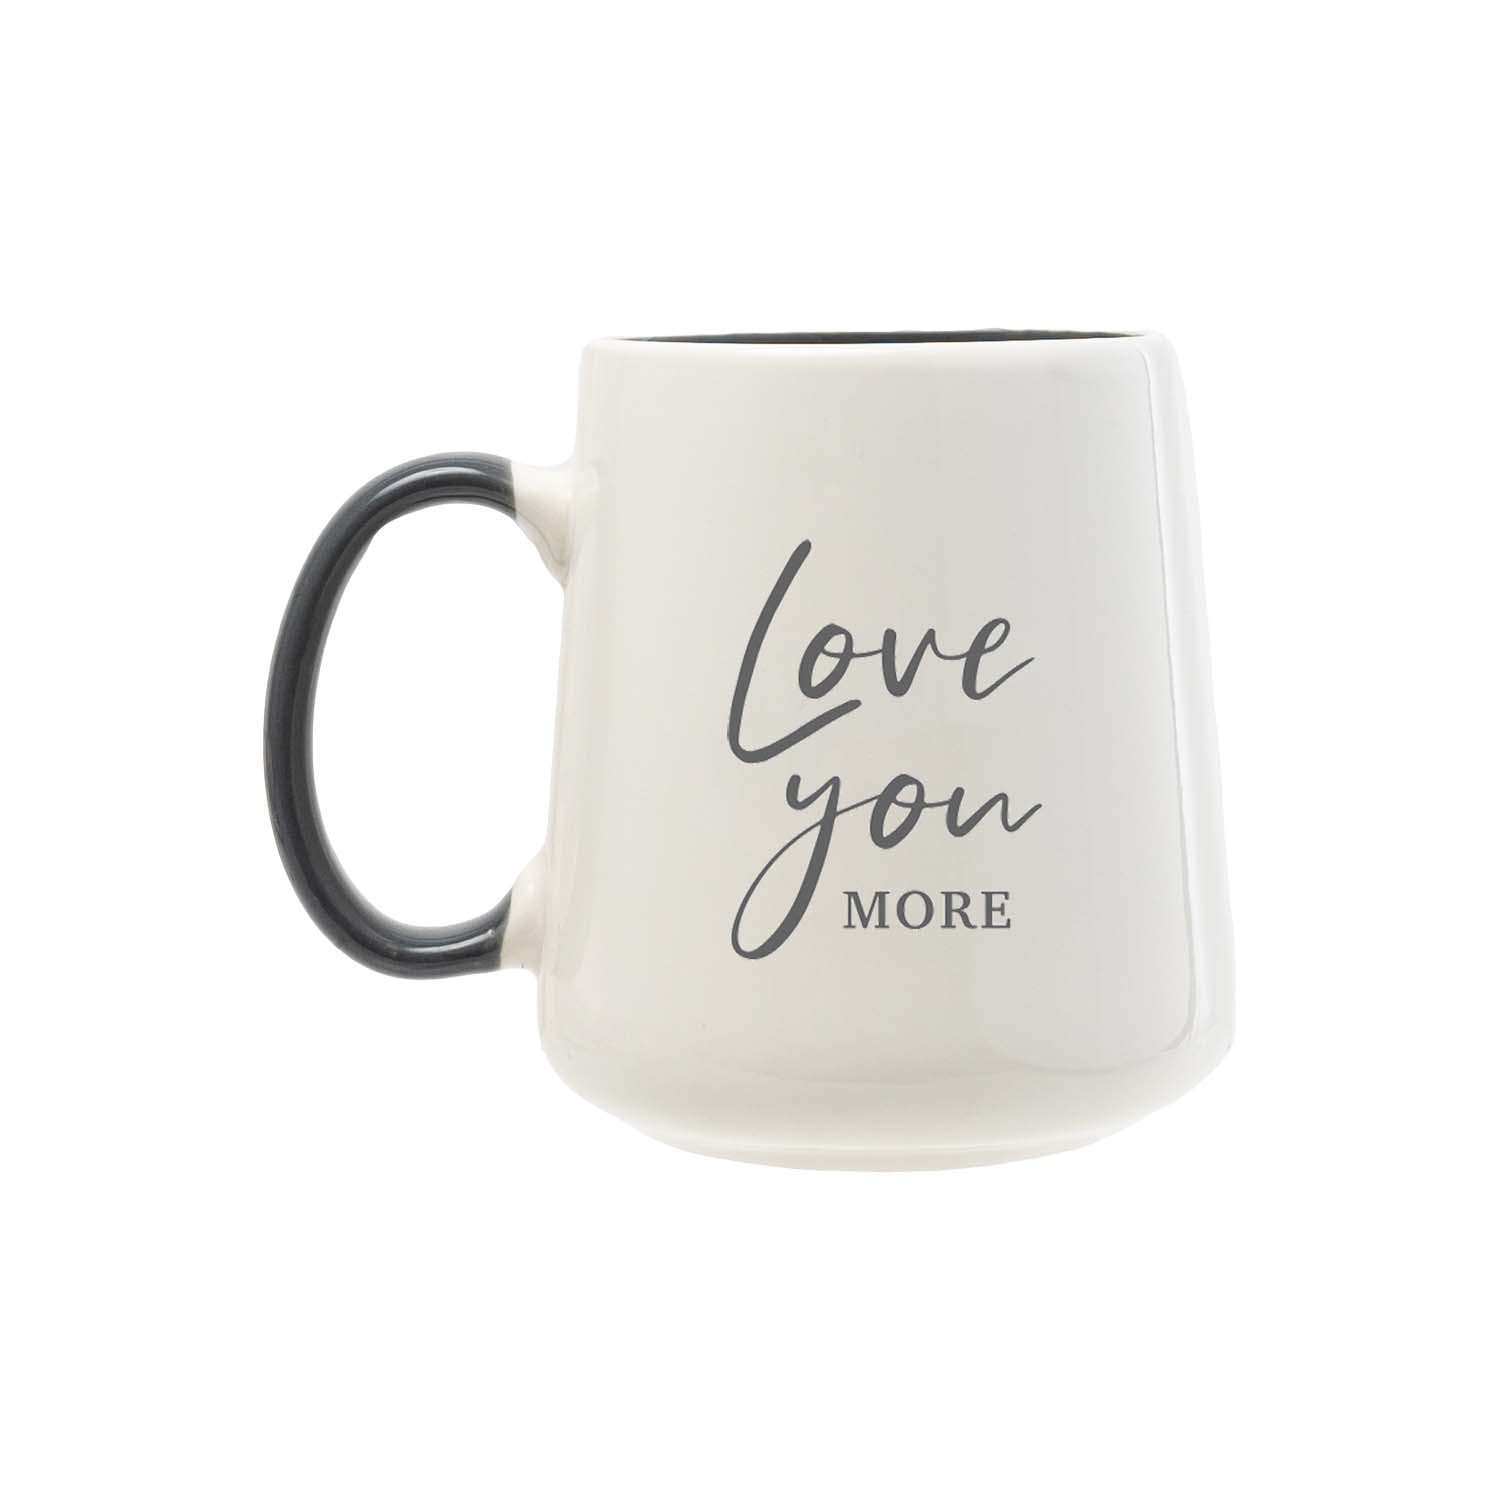 Celebrate love in style with this 'Love You' Mug from the Splosh Wedding Range. Get them a gift they will use and cherish with these wedding mugs. 